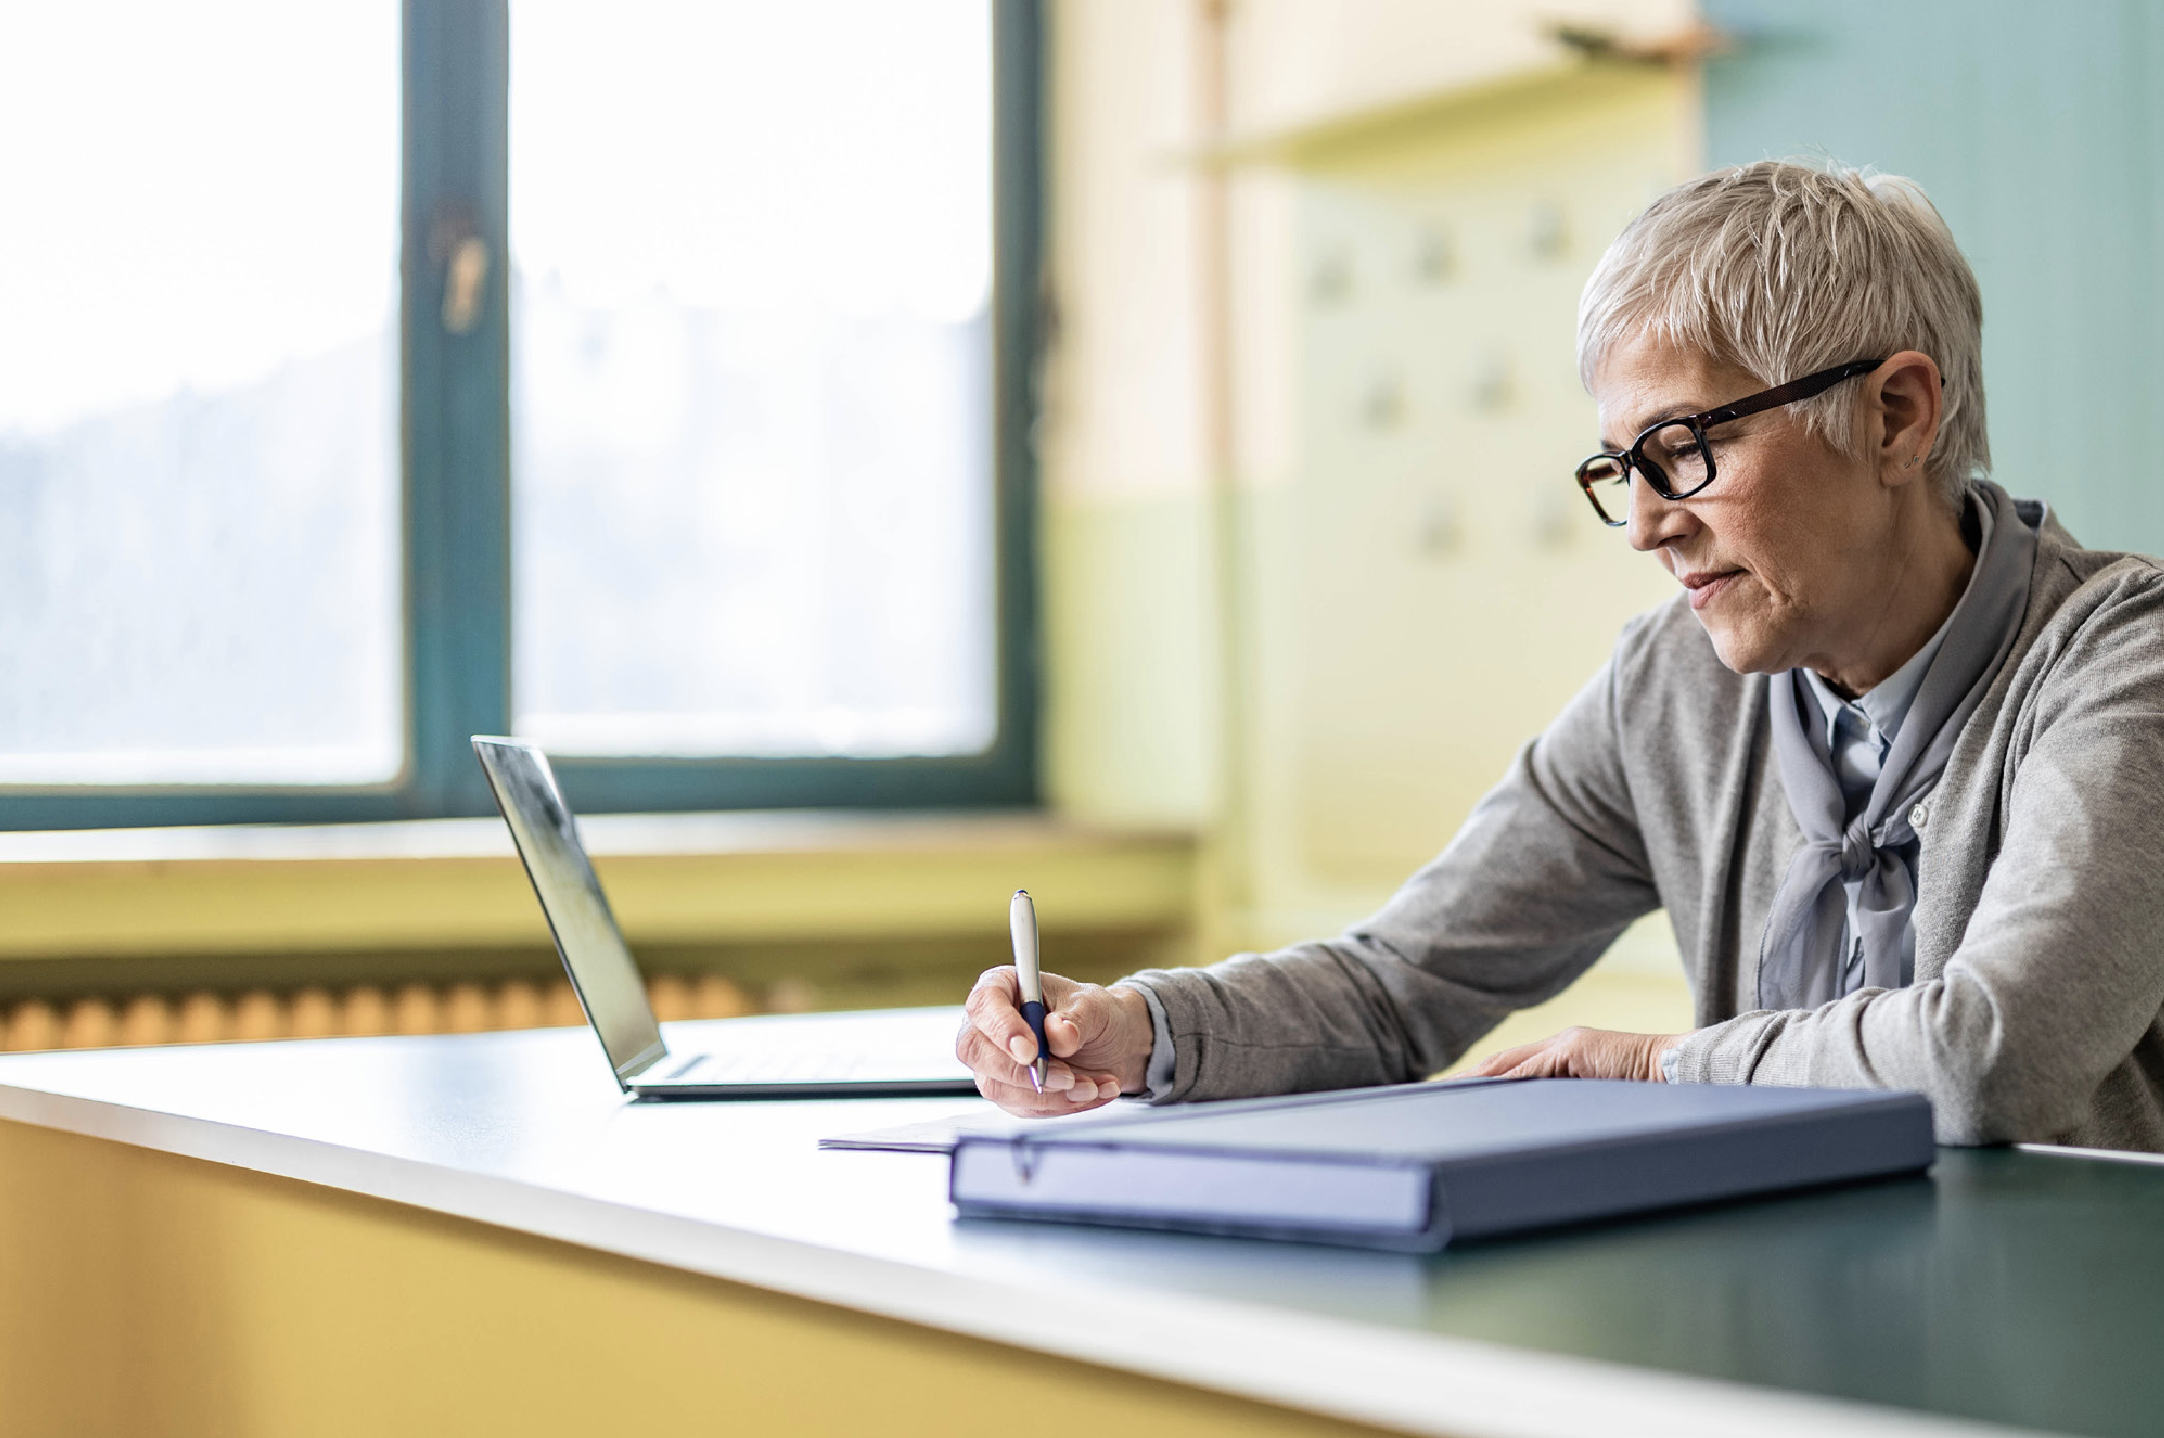 Photo Of Teacher Wearing Glasses Writing At Desk With Laptop@2x